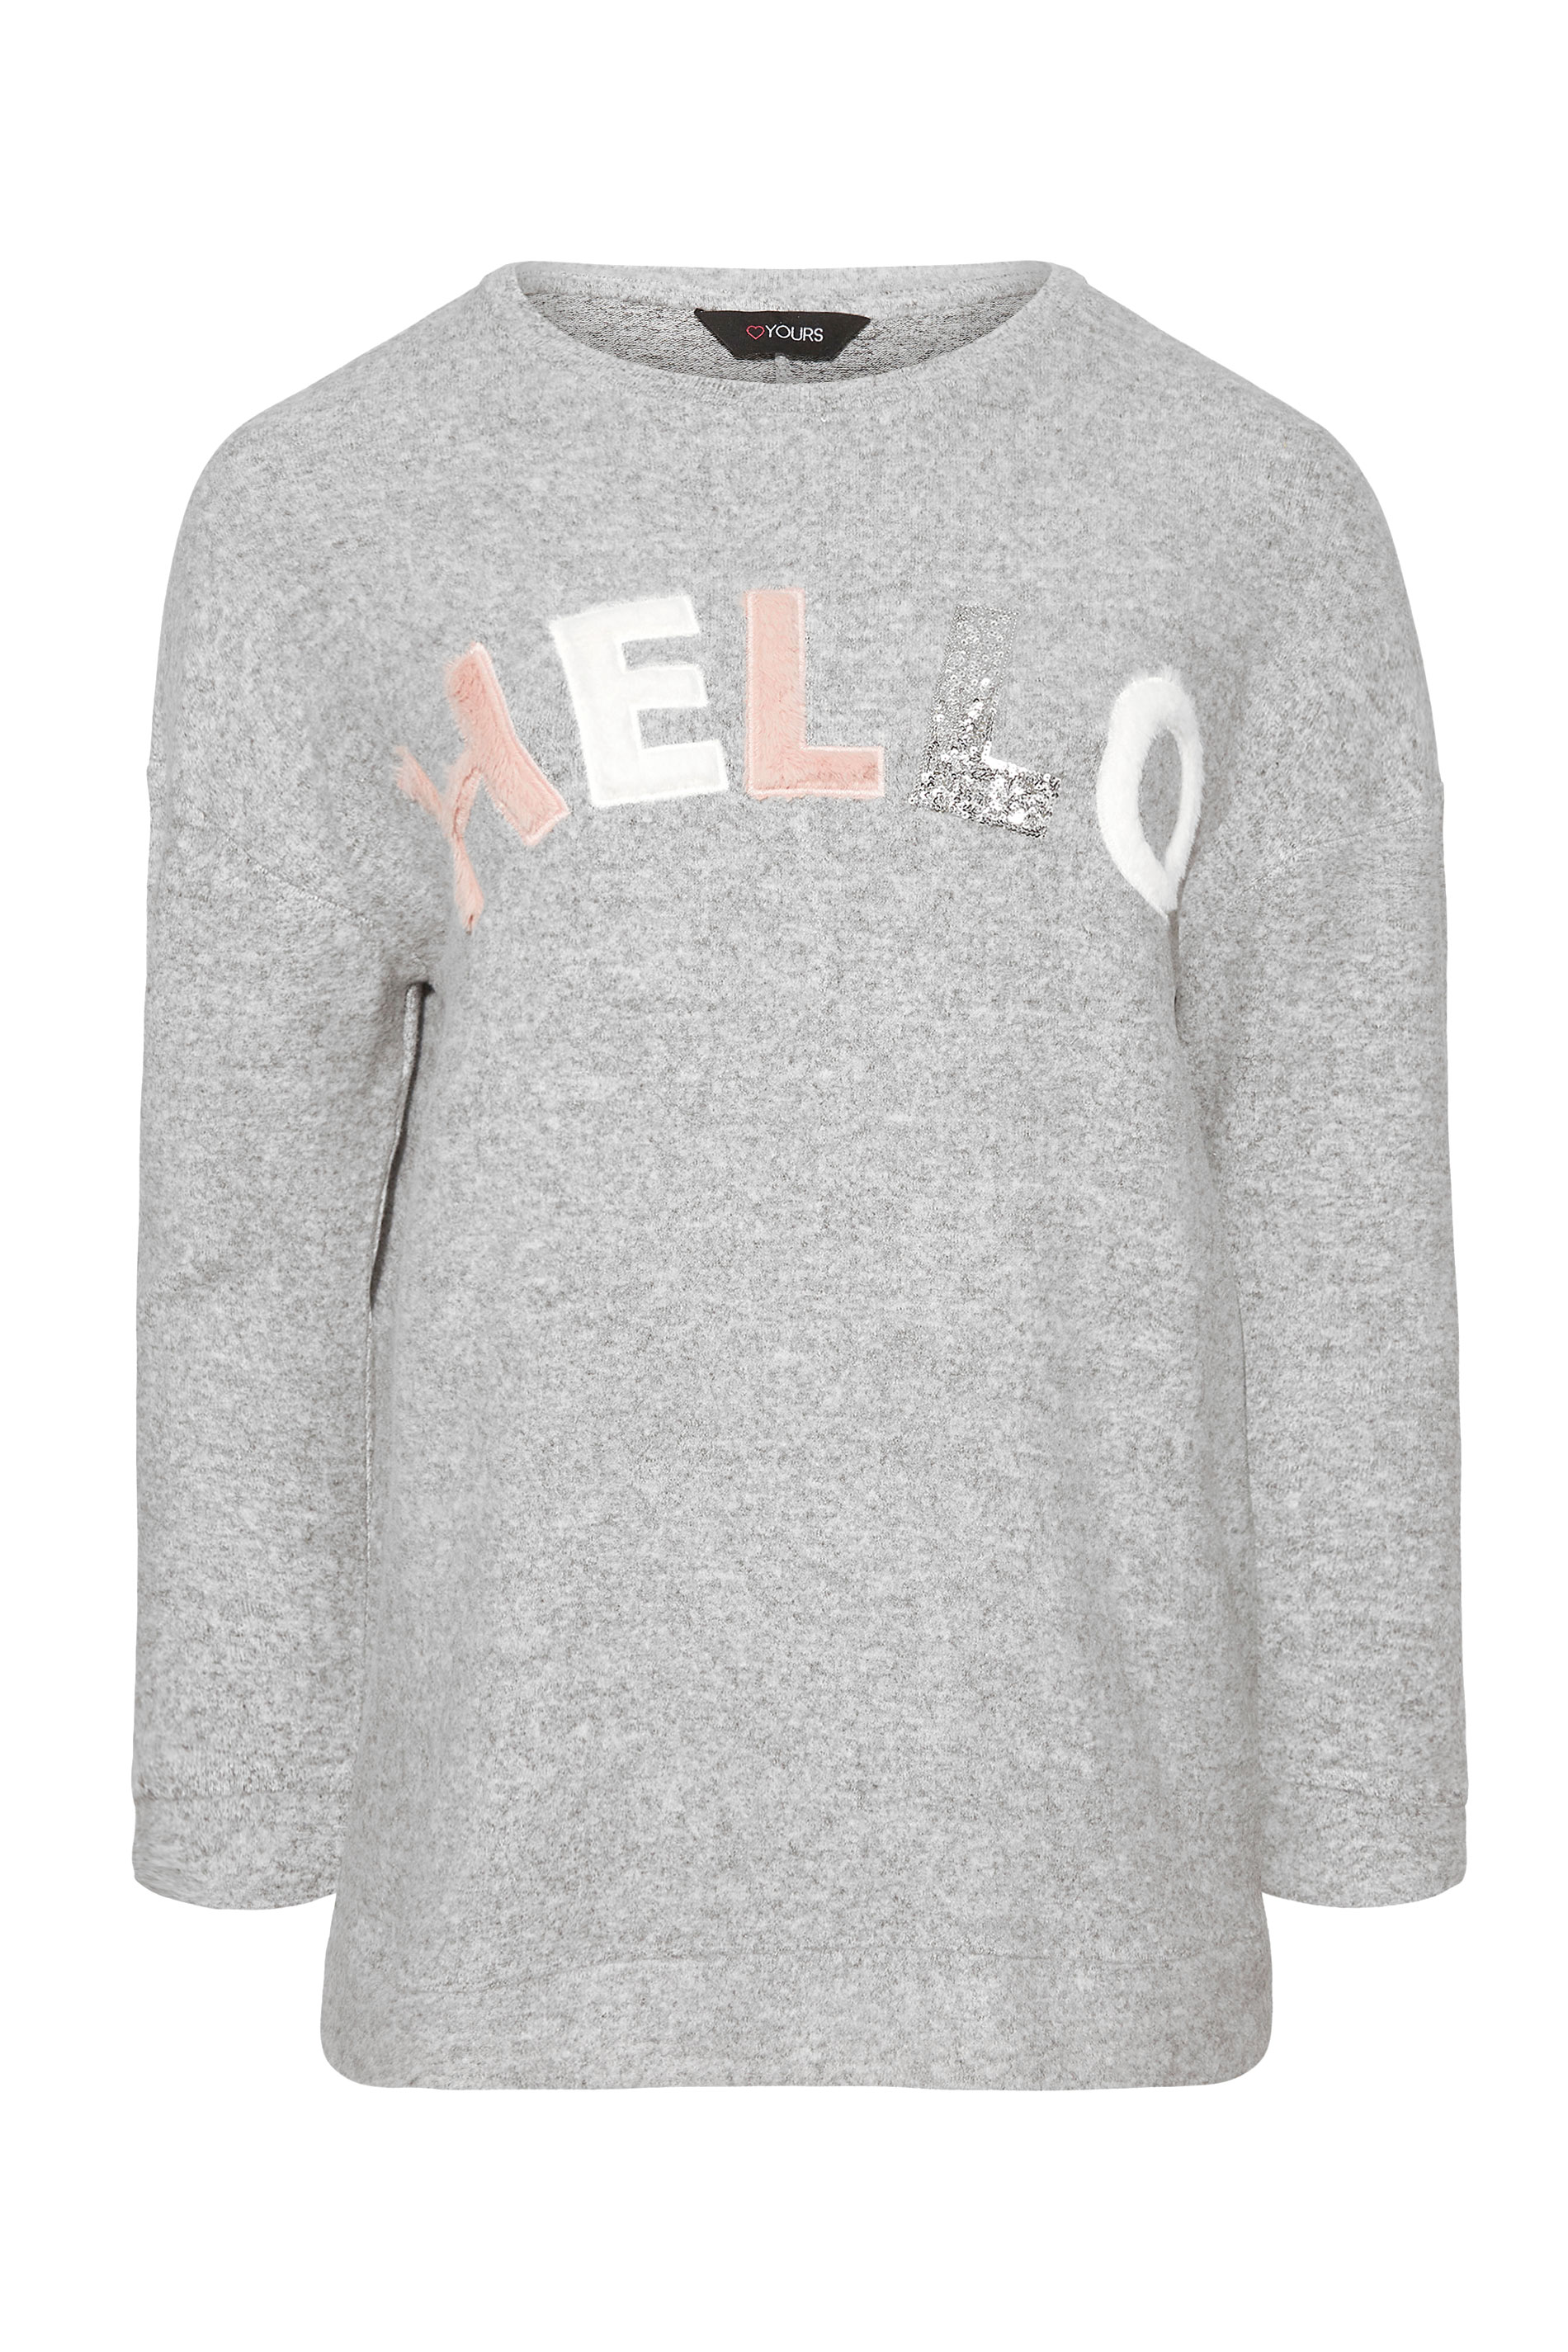 Grande taille  Maille Grande taille  Pulls en Maille | Pull Gris en Maille Slogan 'Hello' - QF98058